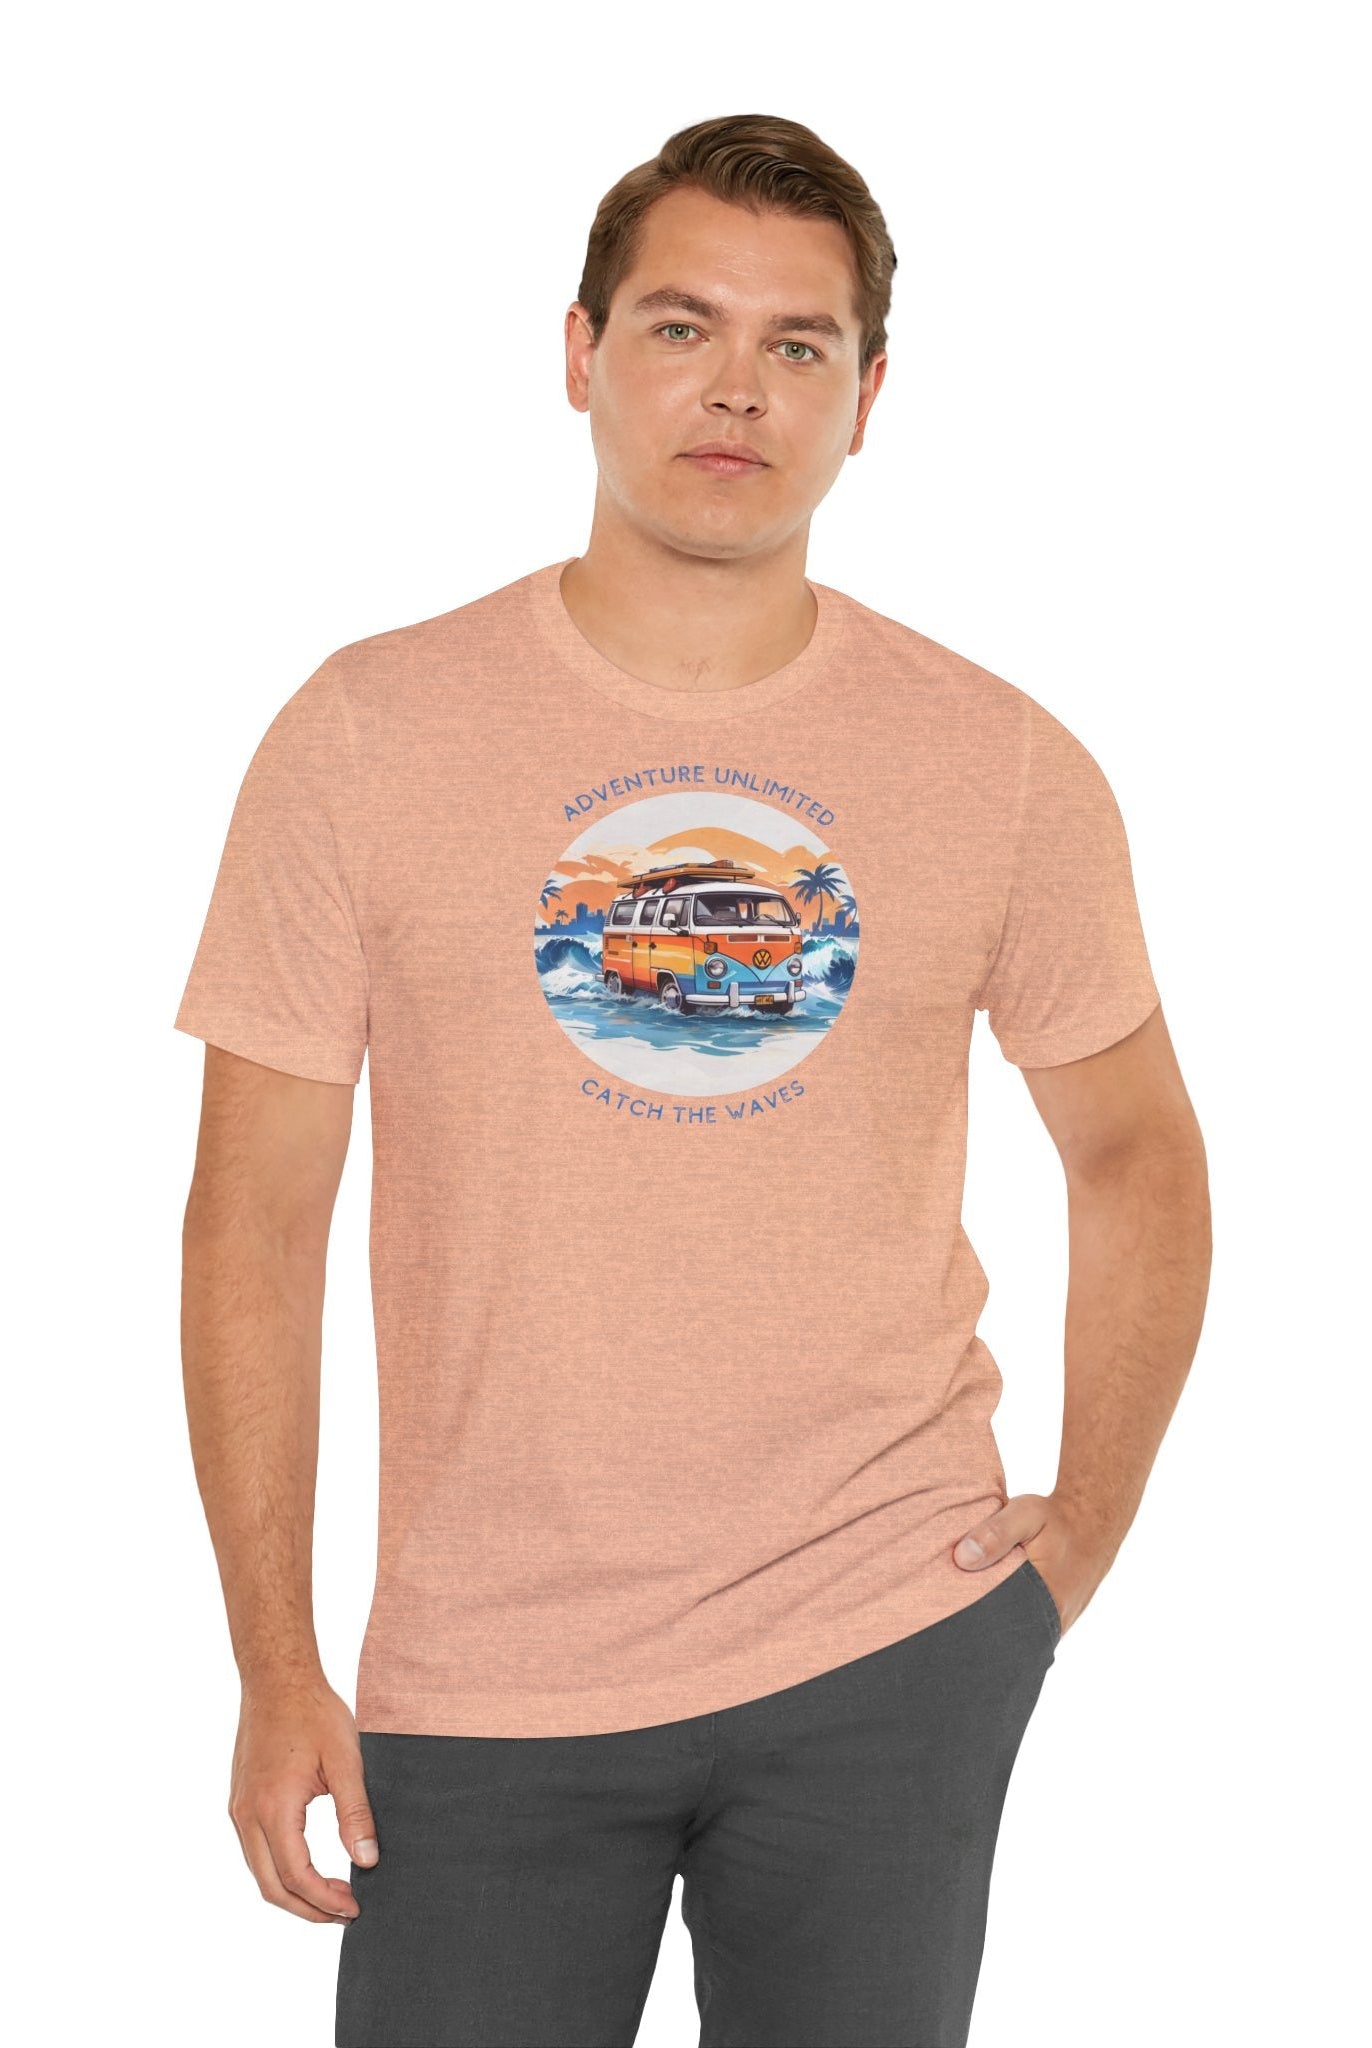 Adventure Unlimited Pink Surf Logo Printed T-Shirt by Soulshinecreators